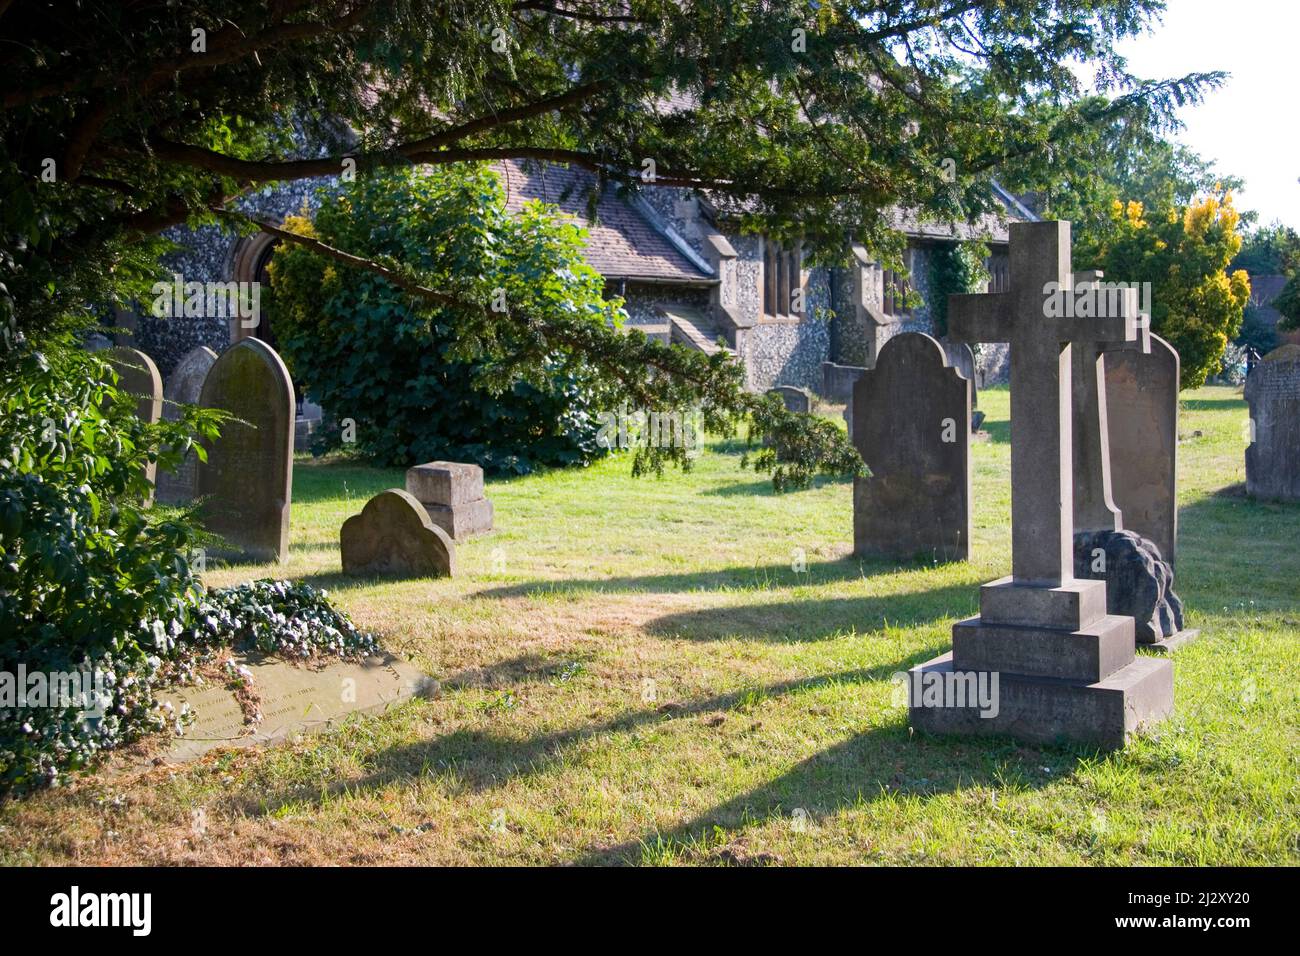 English Cemetery. A quiet countryside graveyard at dusk by a flint stone church in rural England. Stock Photo